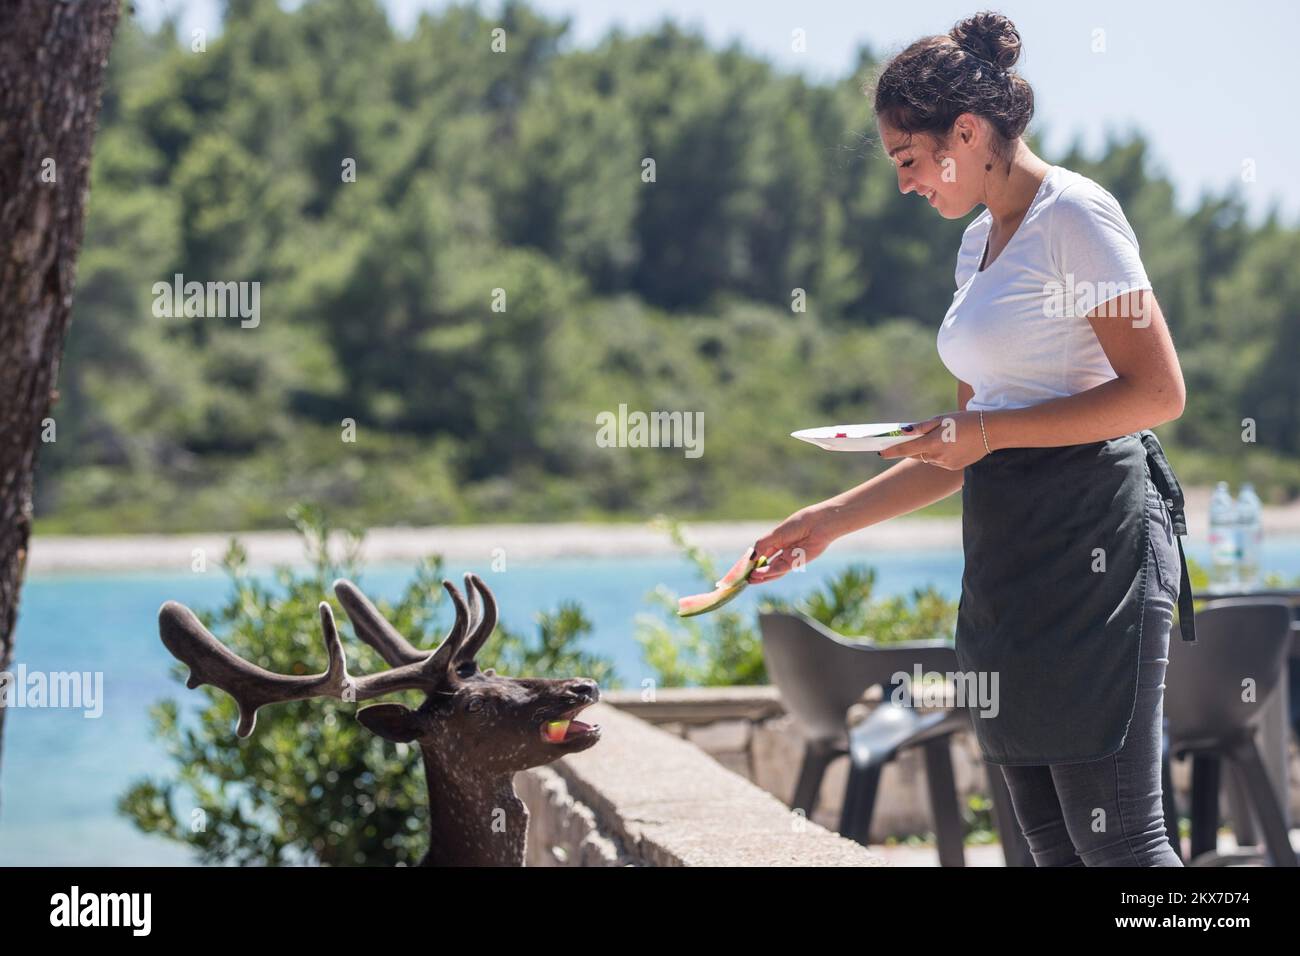 17.07.2018. Korcula, Islan Badija - Fallow deers are not affraid of tourists and they are enjoying their life on island Badija at Adriatic sea, Badija Island is recognizable by the population of fallow deers that had been inhabited island Badija in 1958. Poto: Davor Puklavec/PIXSELL  Stock Photo